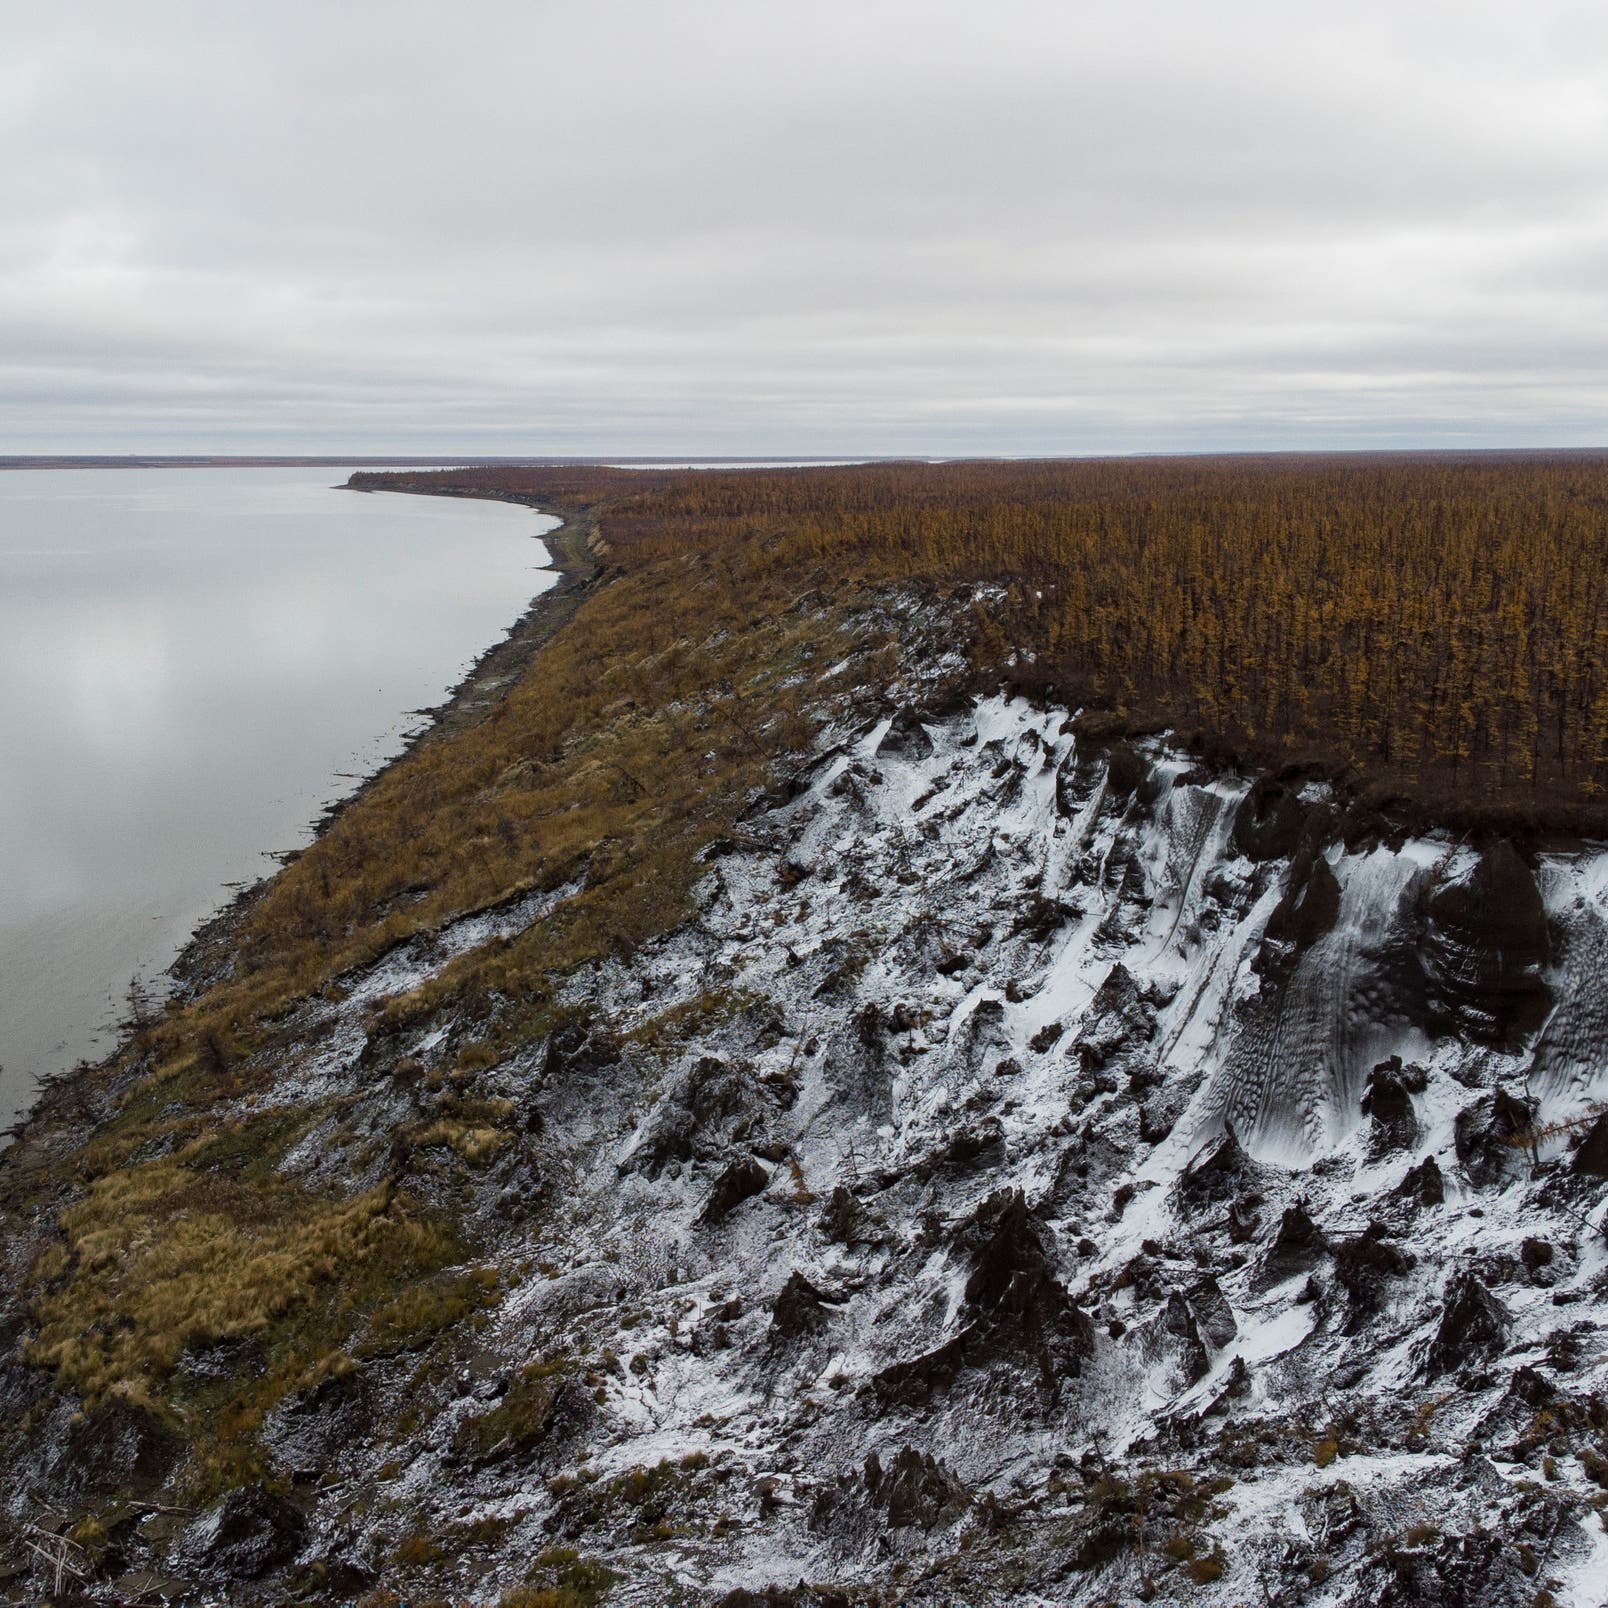 ‘Zombie virus’: Scientist finds infectious particle in melting permafrost